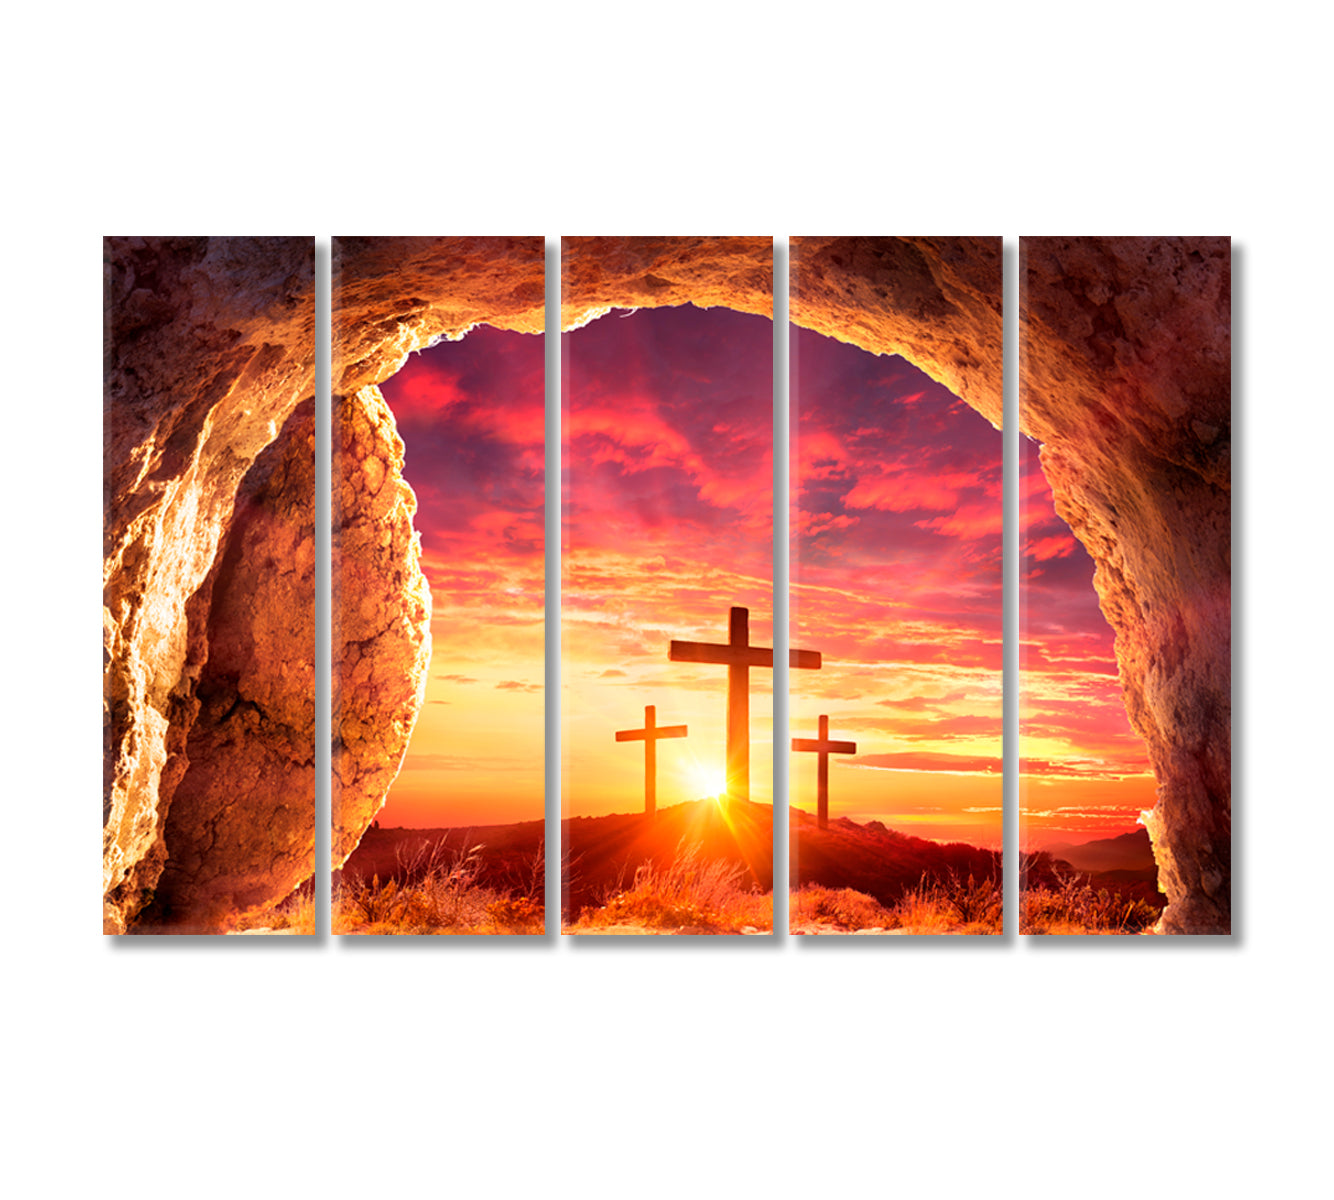 Empty Tomb With Three Crosses On Hill Canvas Print-Canvas Print-CetArt-5 Panels-36x24 inches-CetArt